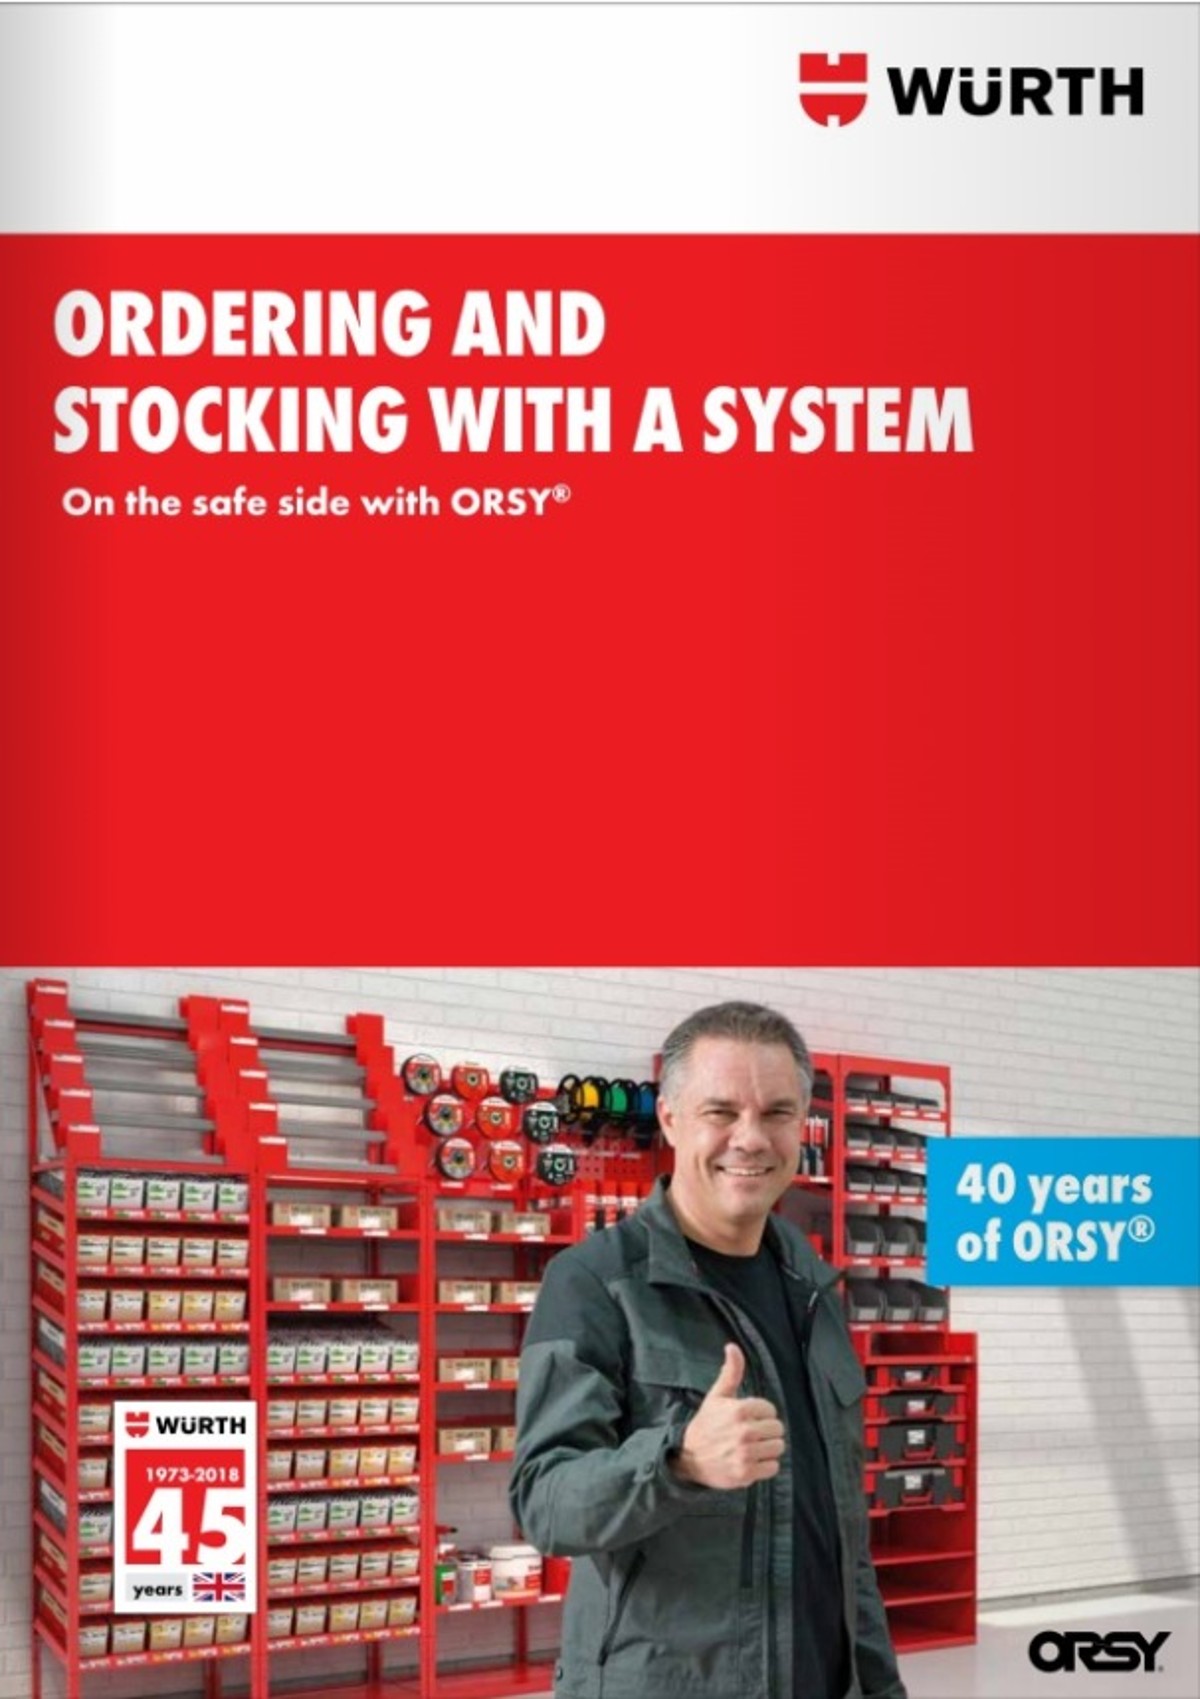 Ordering and stocking with a system